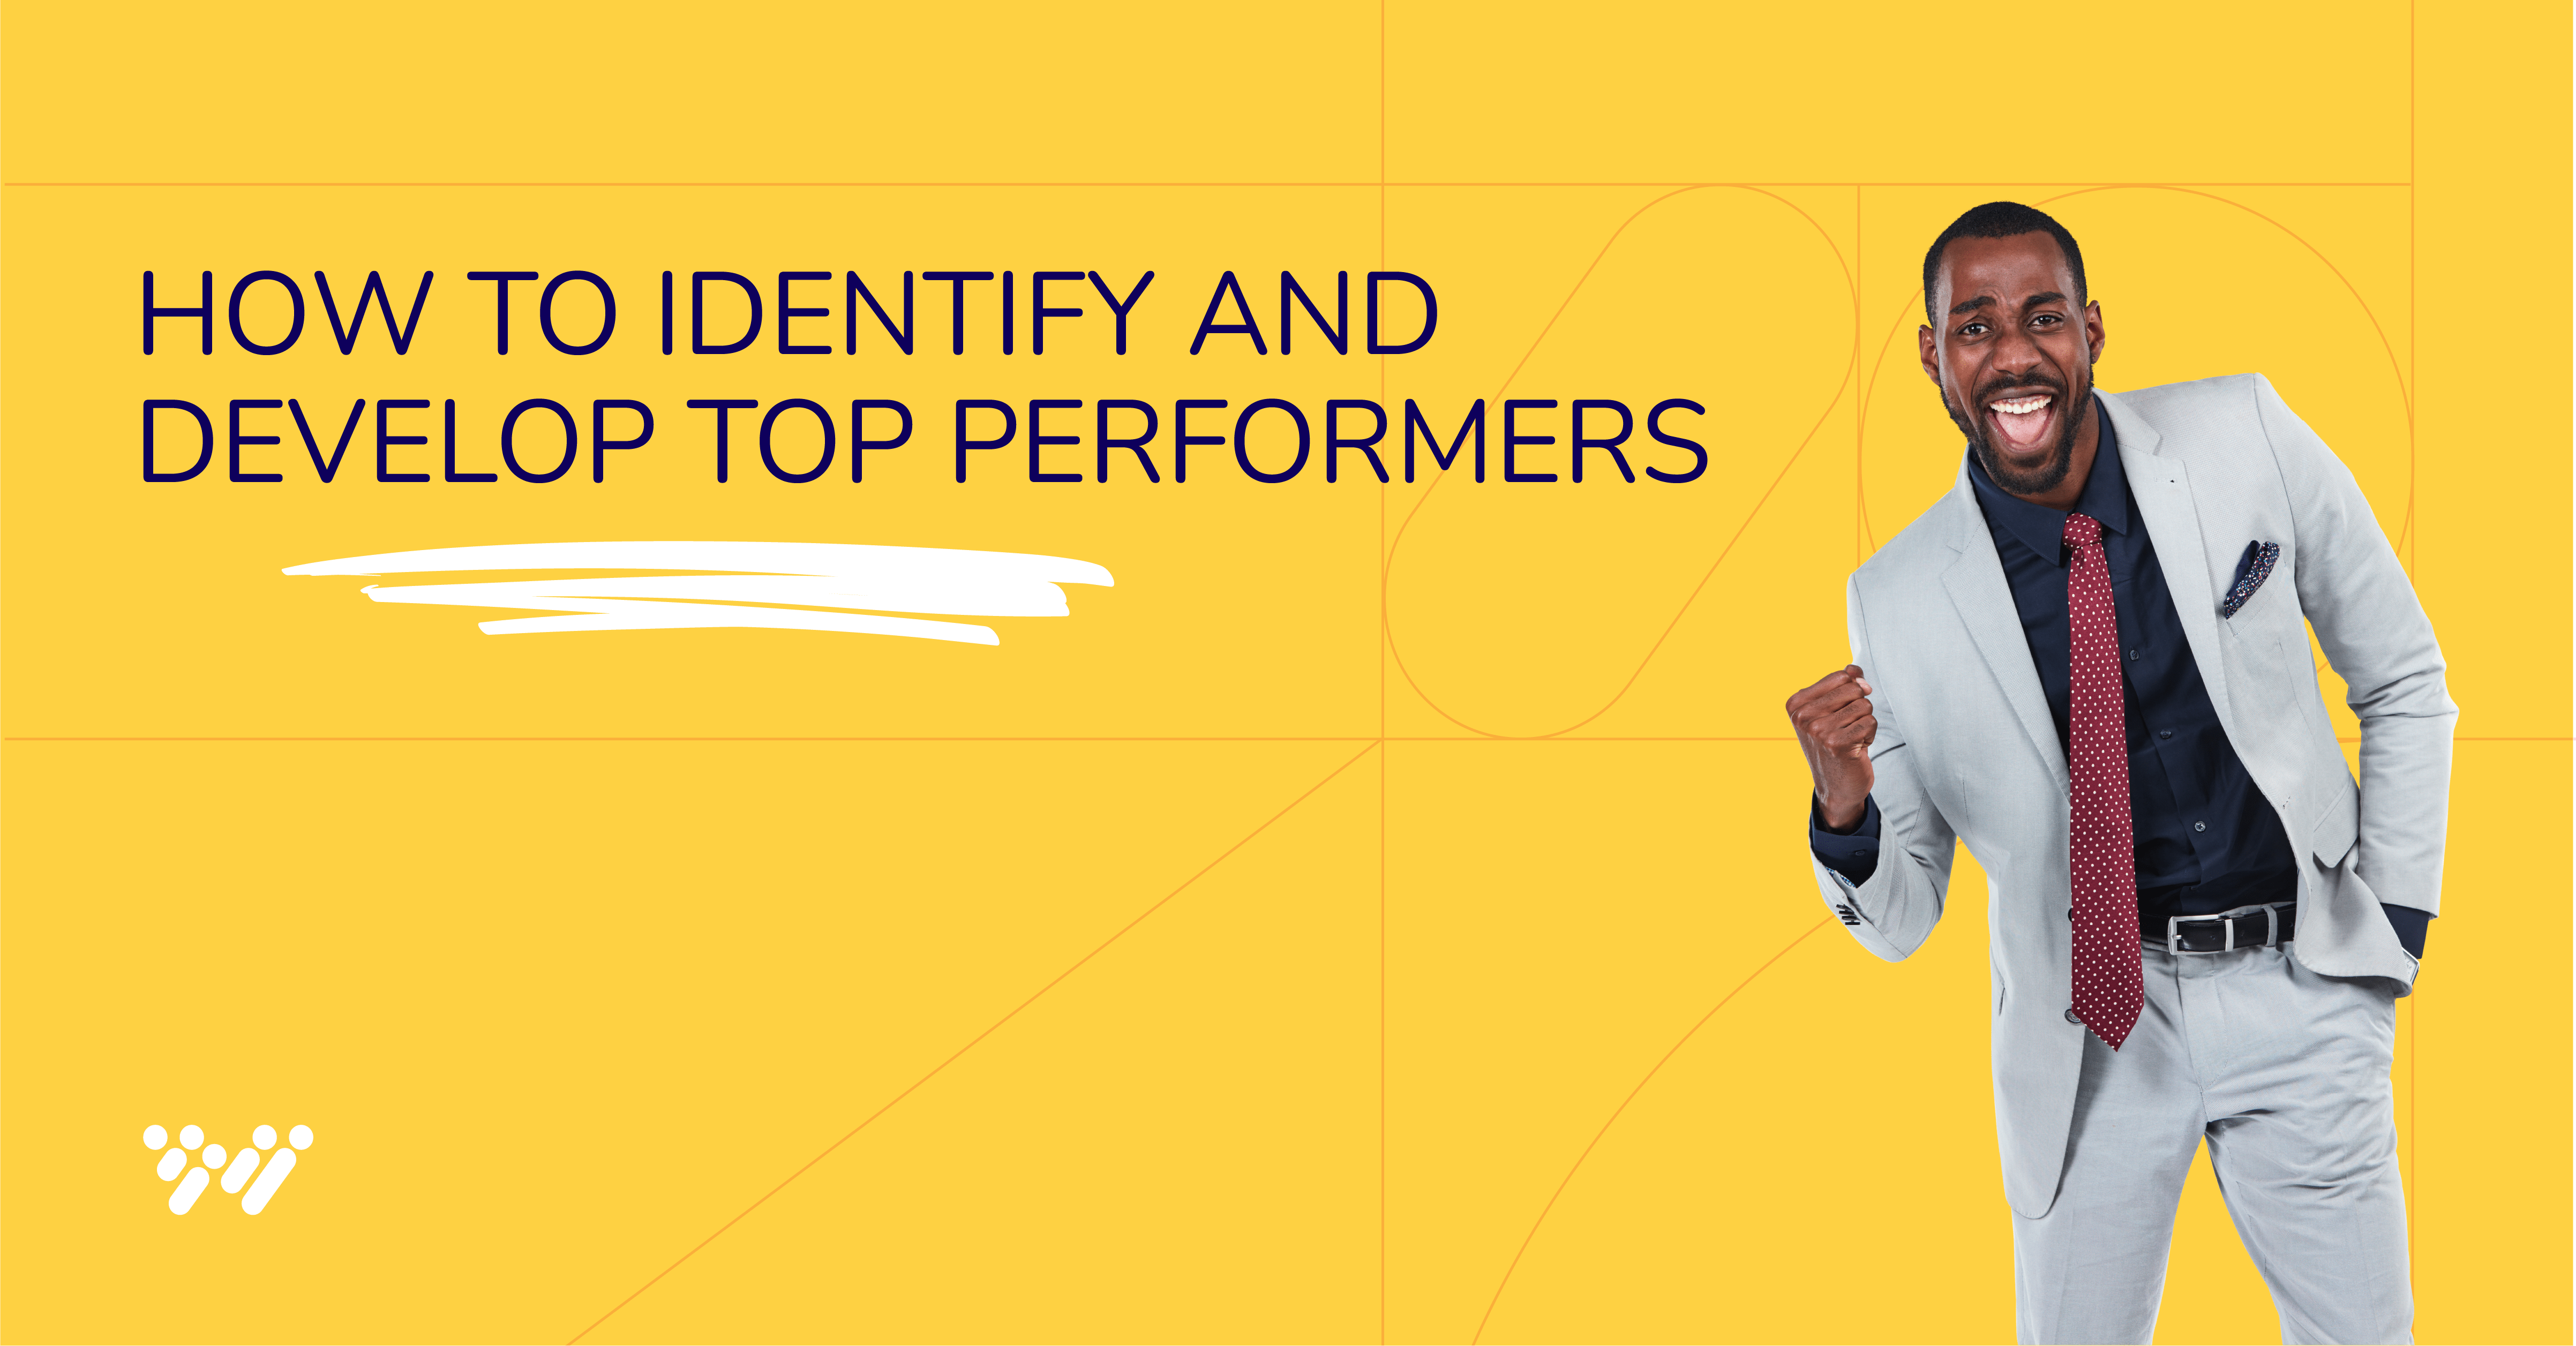 How to Identify and Develop Top Performers